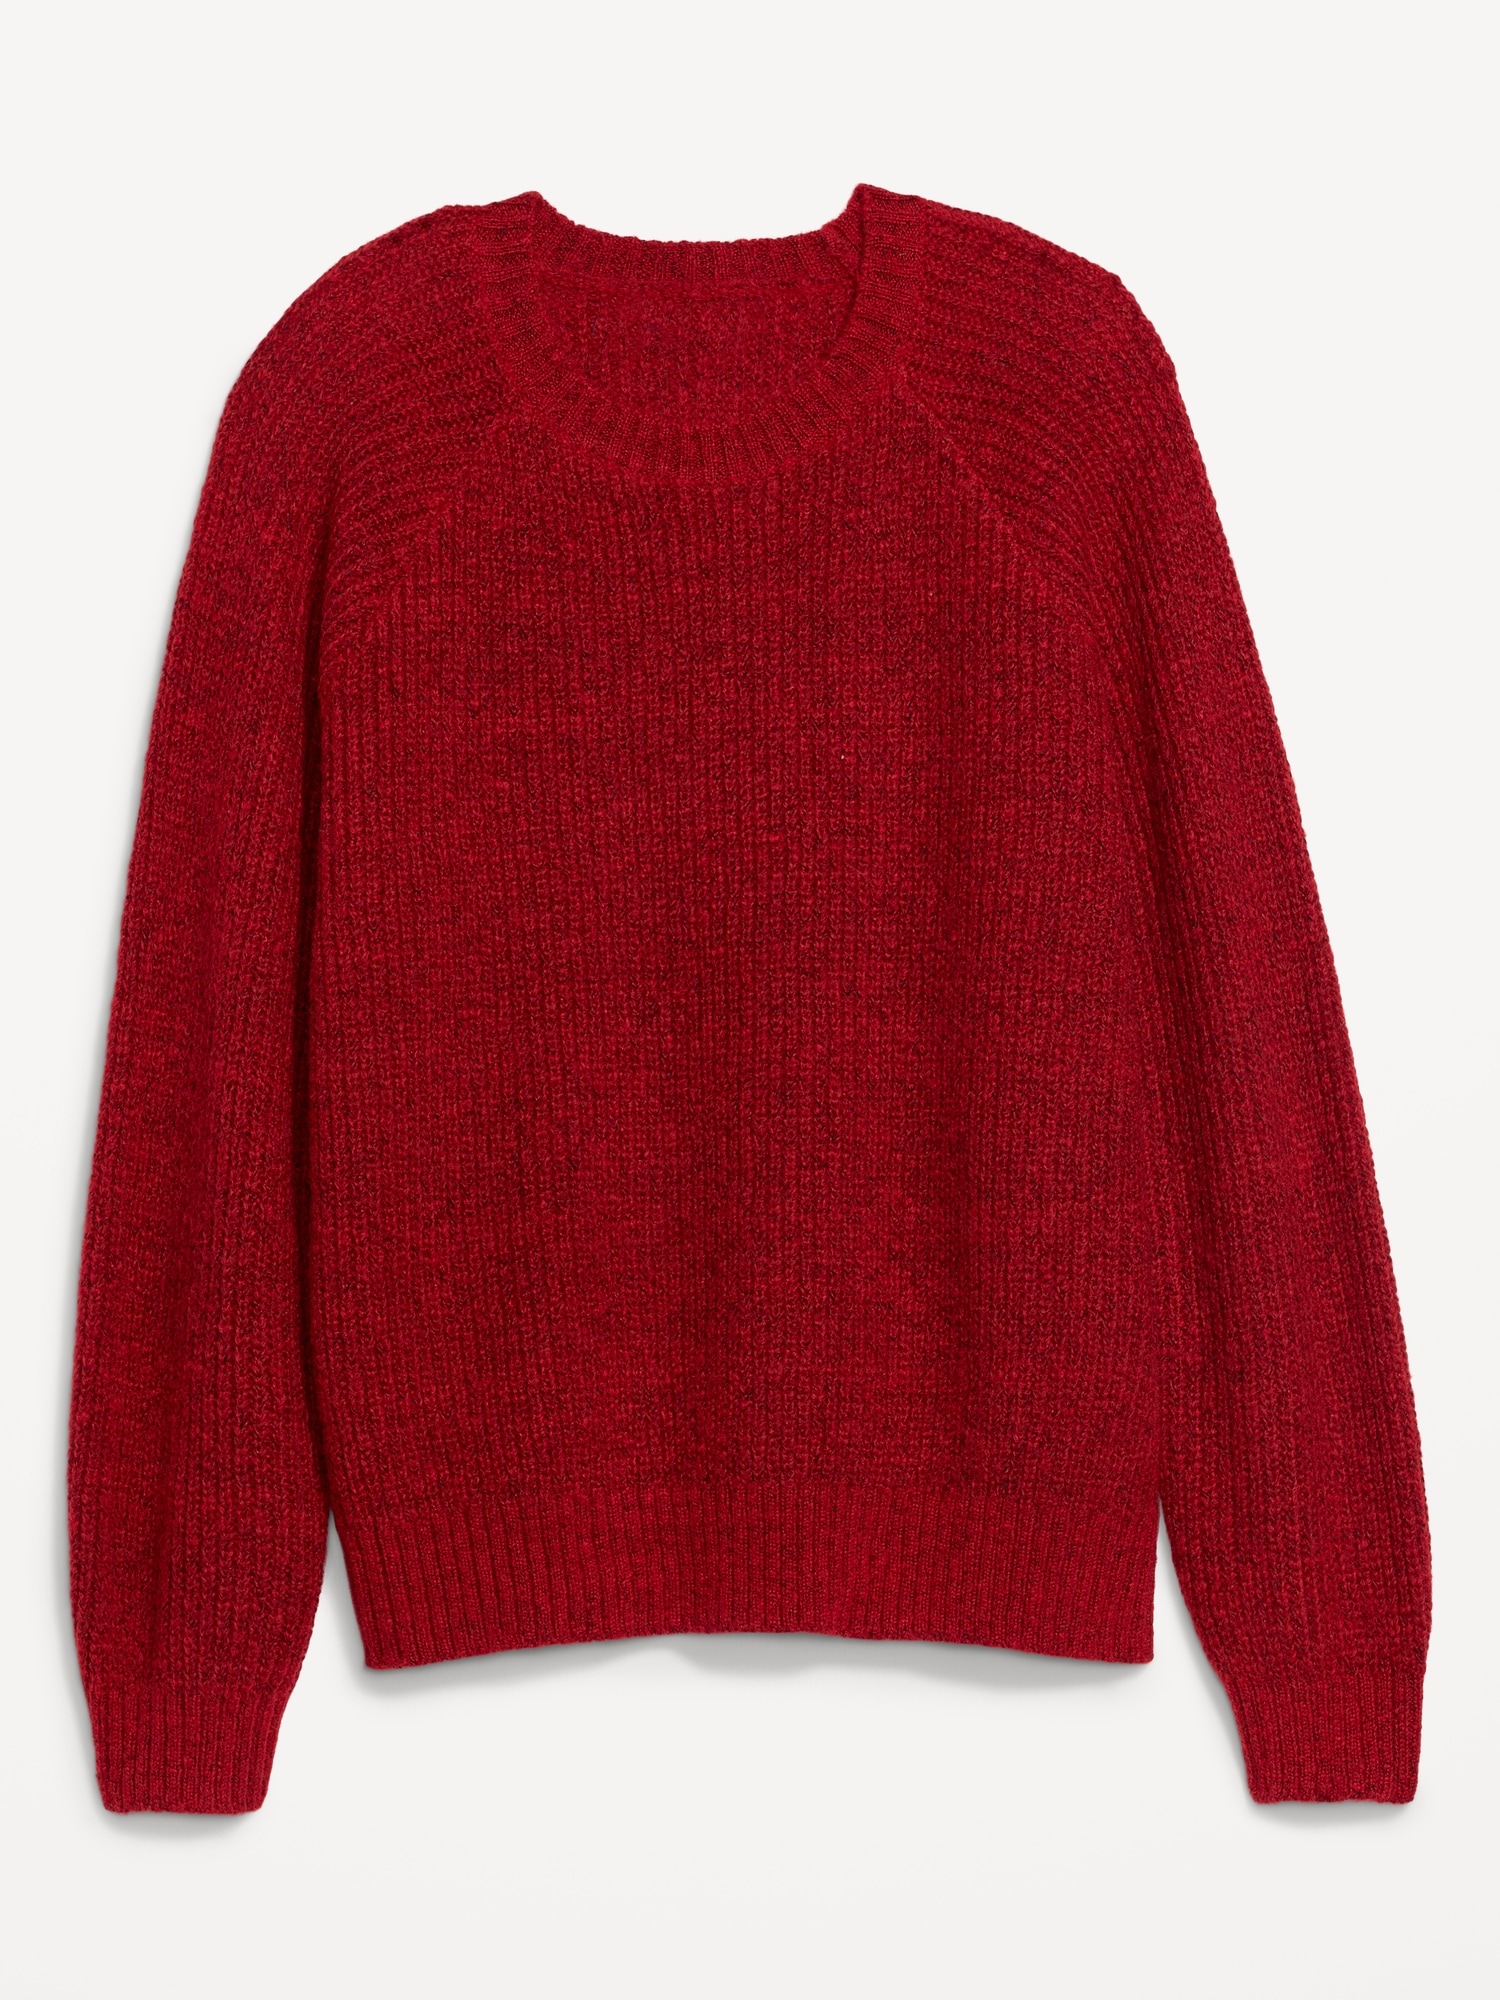 Cozy Pullover Sweater for Women